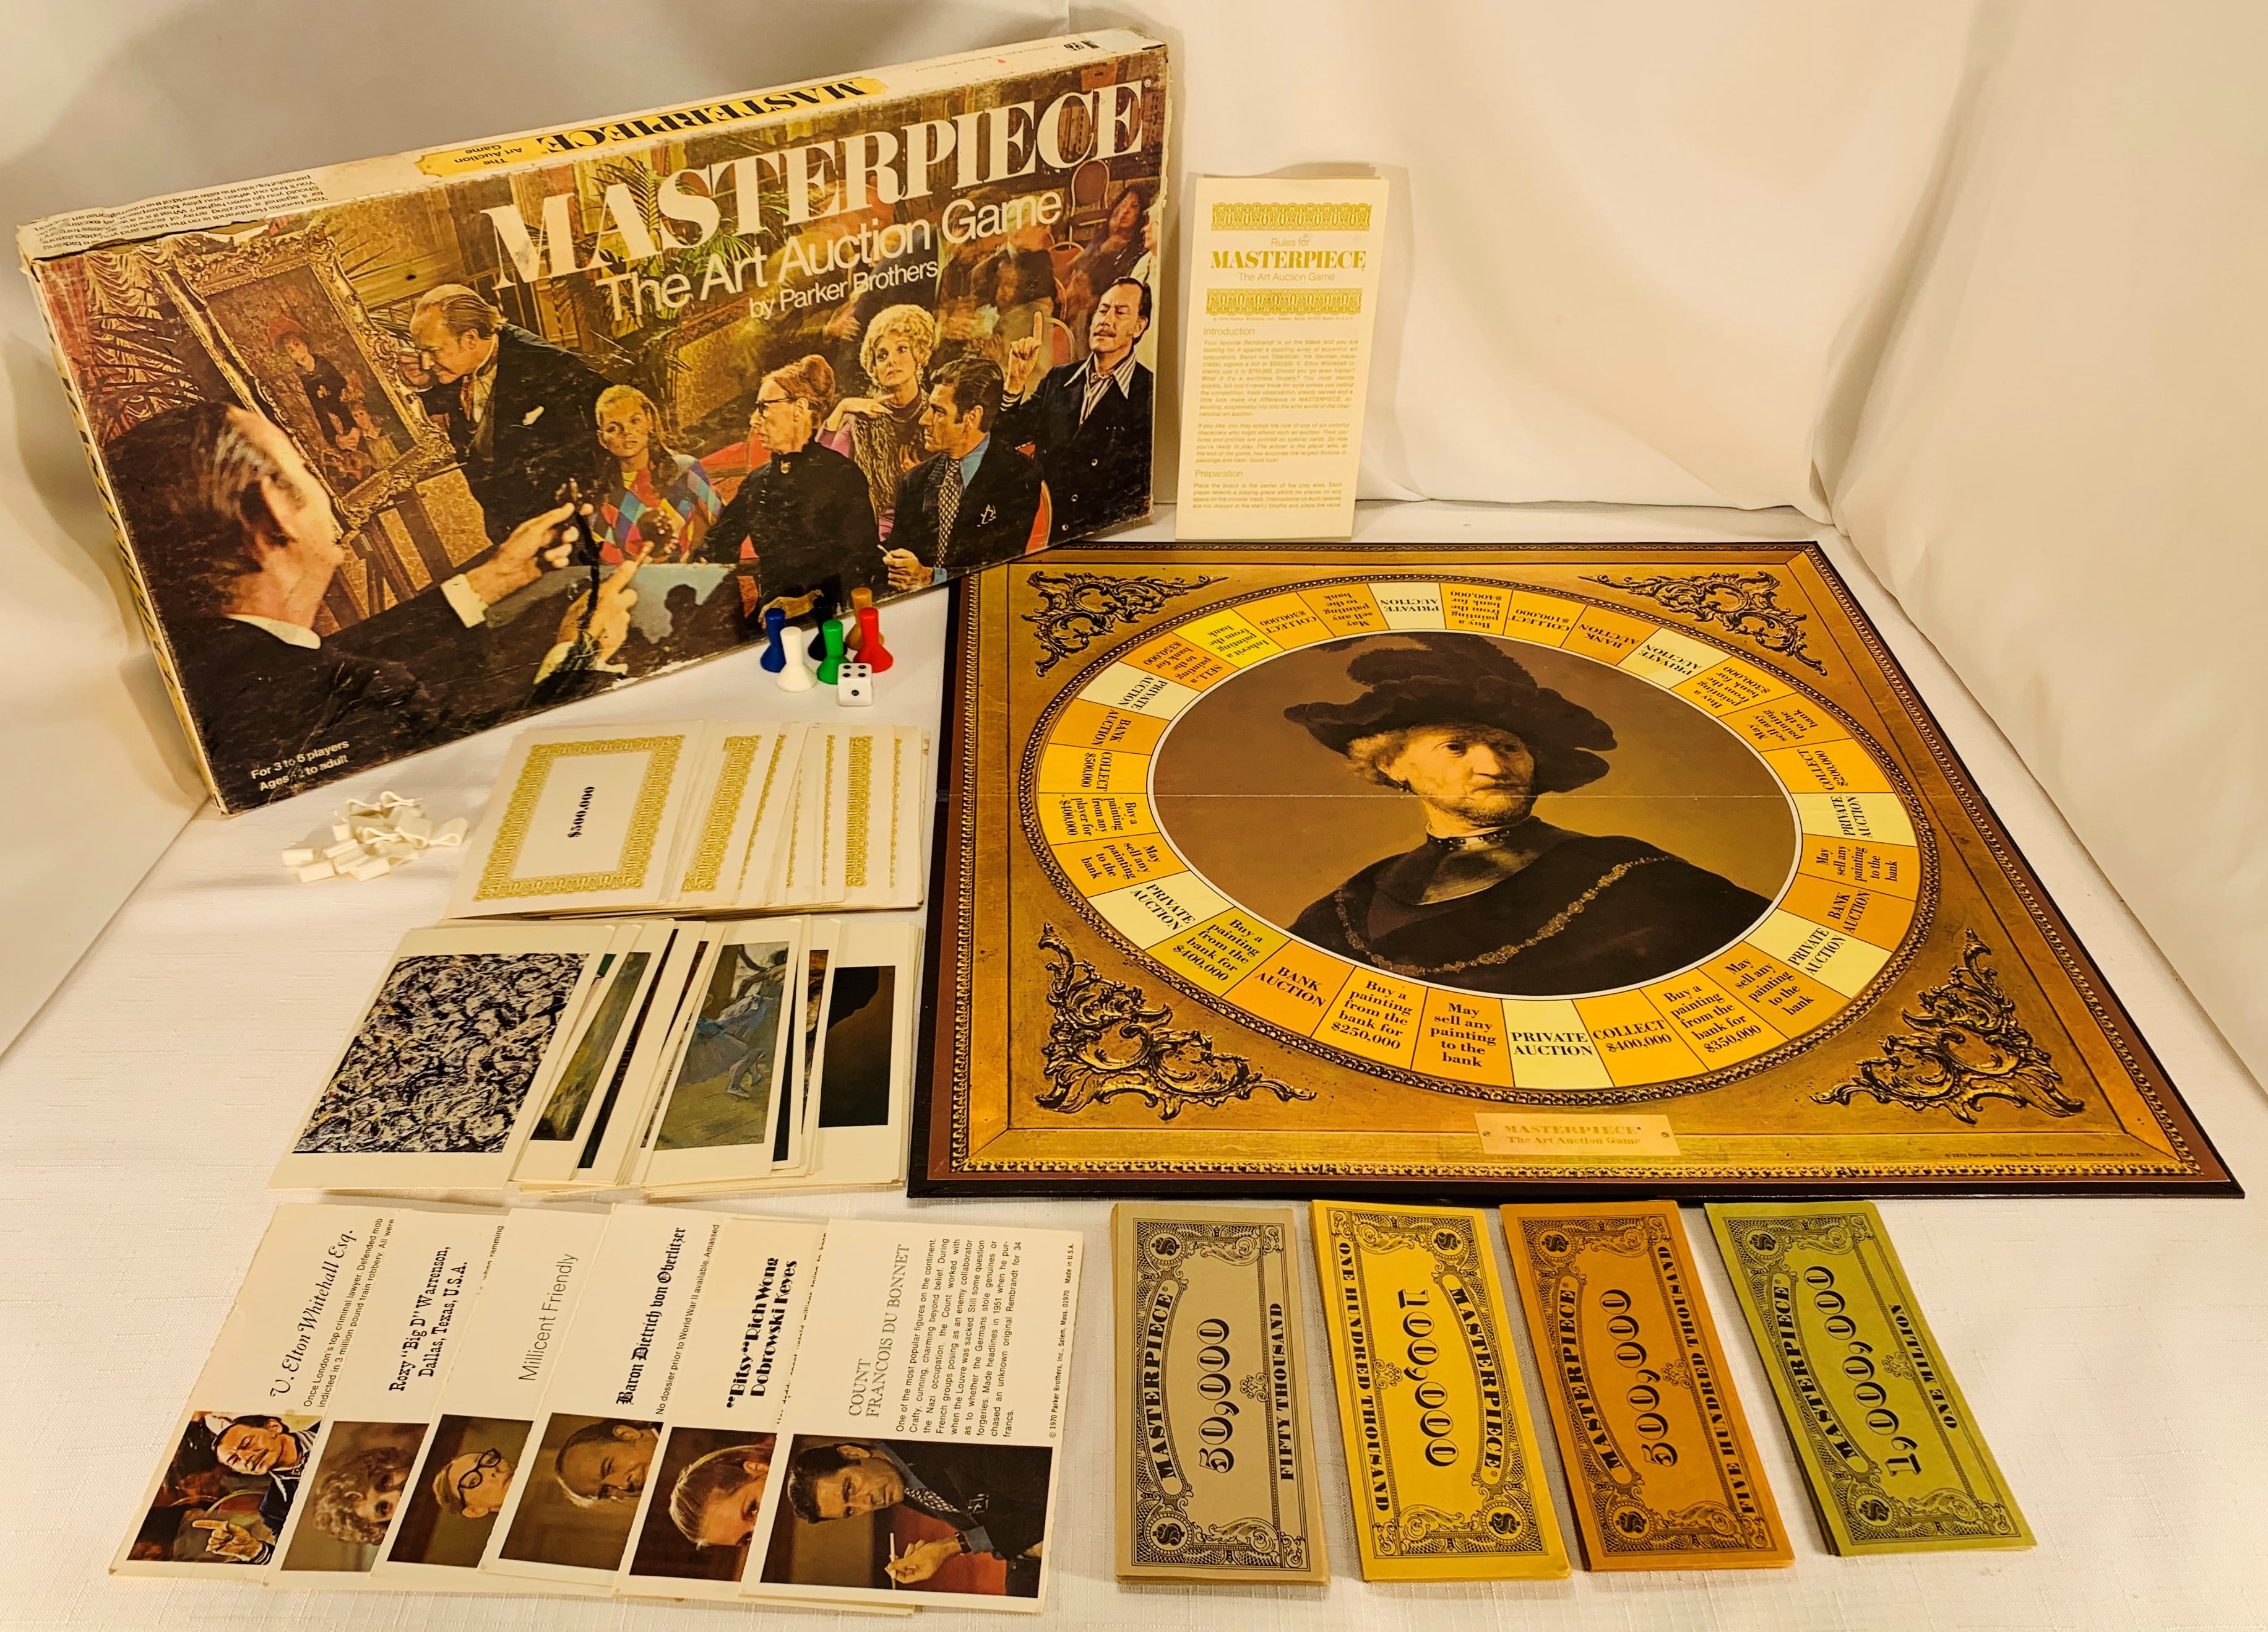 1970 Masterpiece Game by Parker Brothers Complete in Great Condition FREE SHIP 